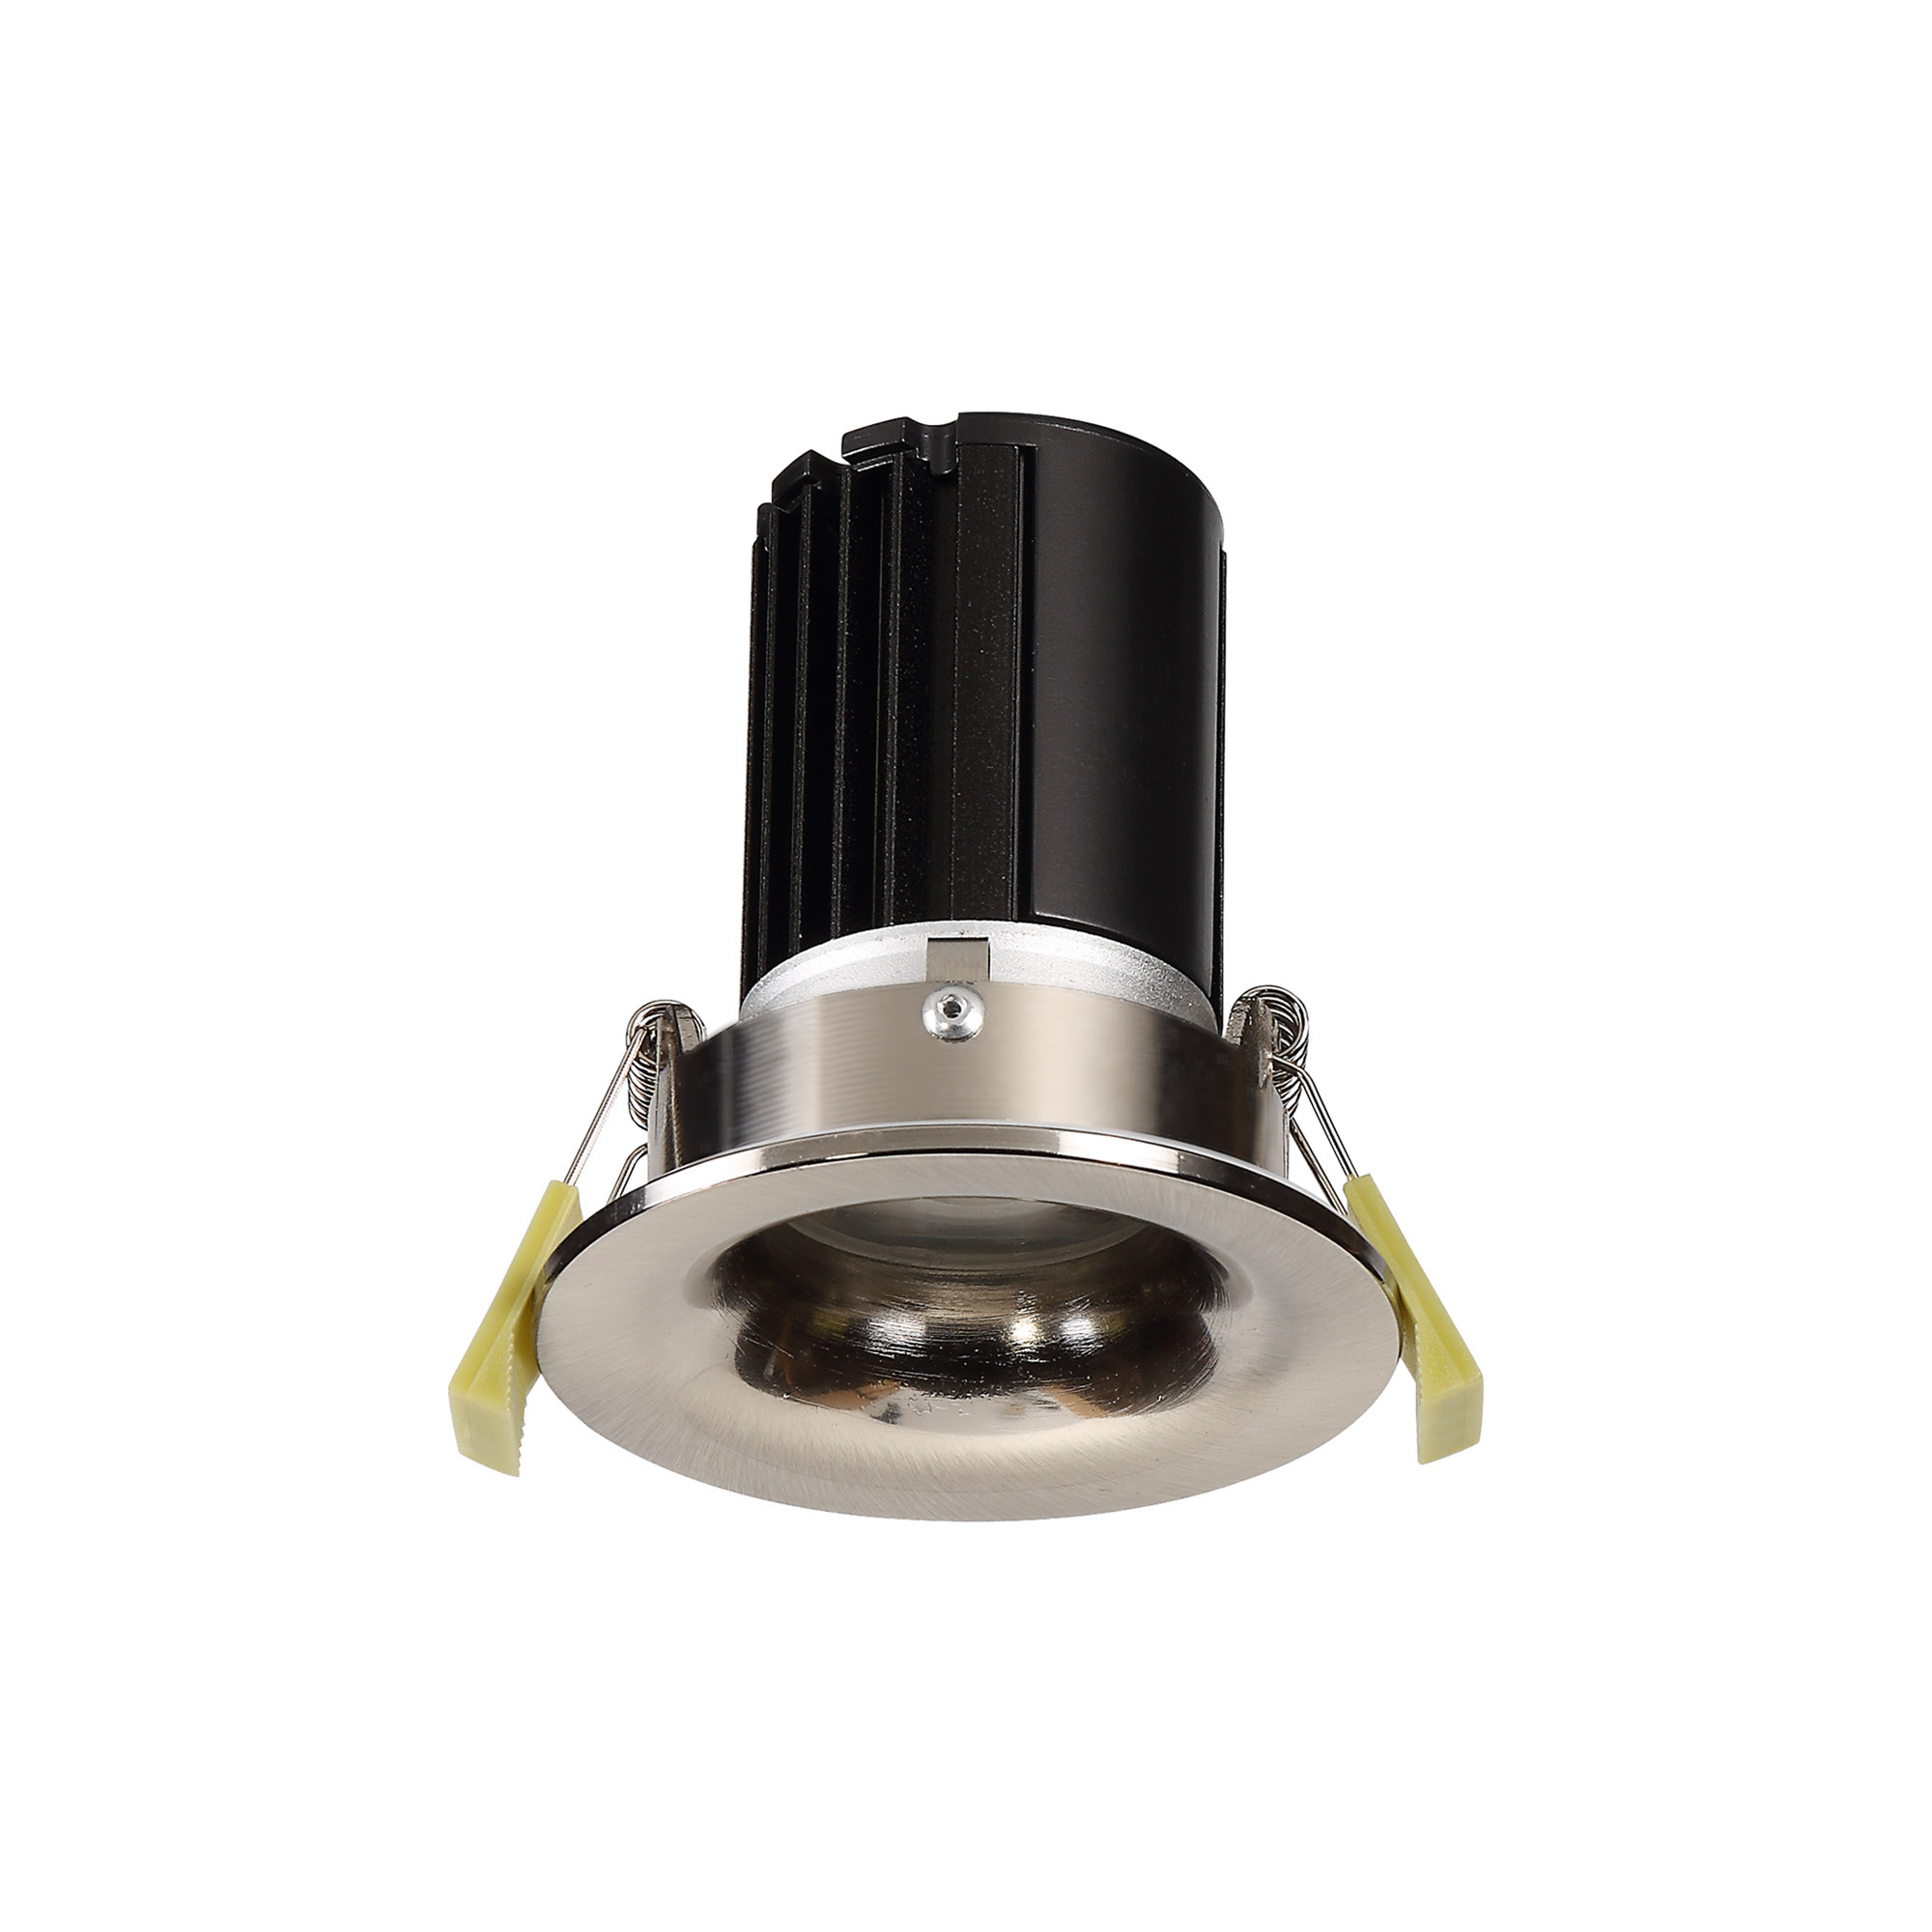 DM200781  Bruve 10 Tridonic powered 10W 2700K 750lm 12° CRI>90 LED Engine Satin Nickel Fixed Round Recessed Downlight; Inner Glass cover; IP65